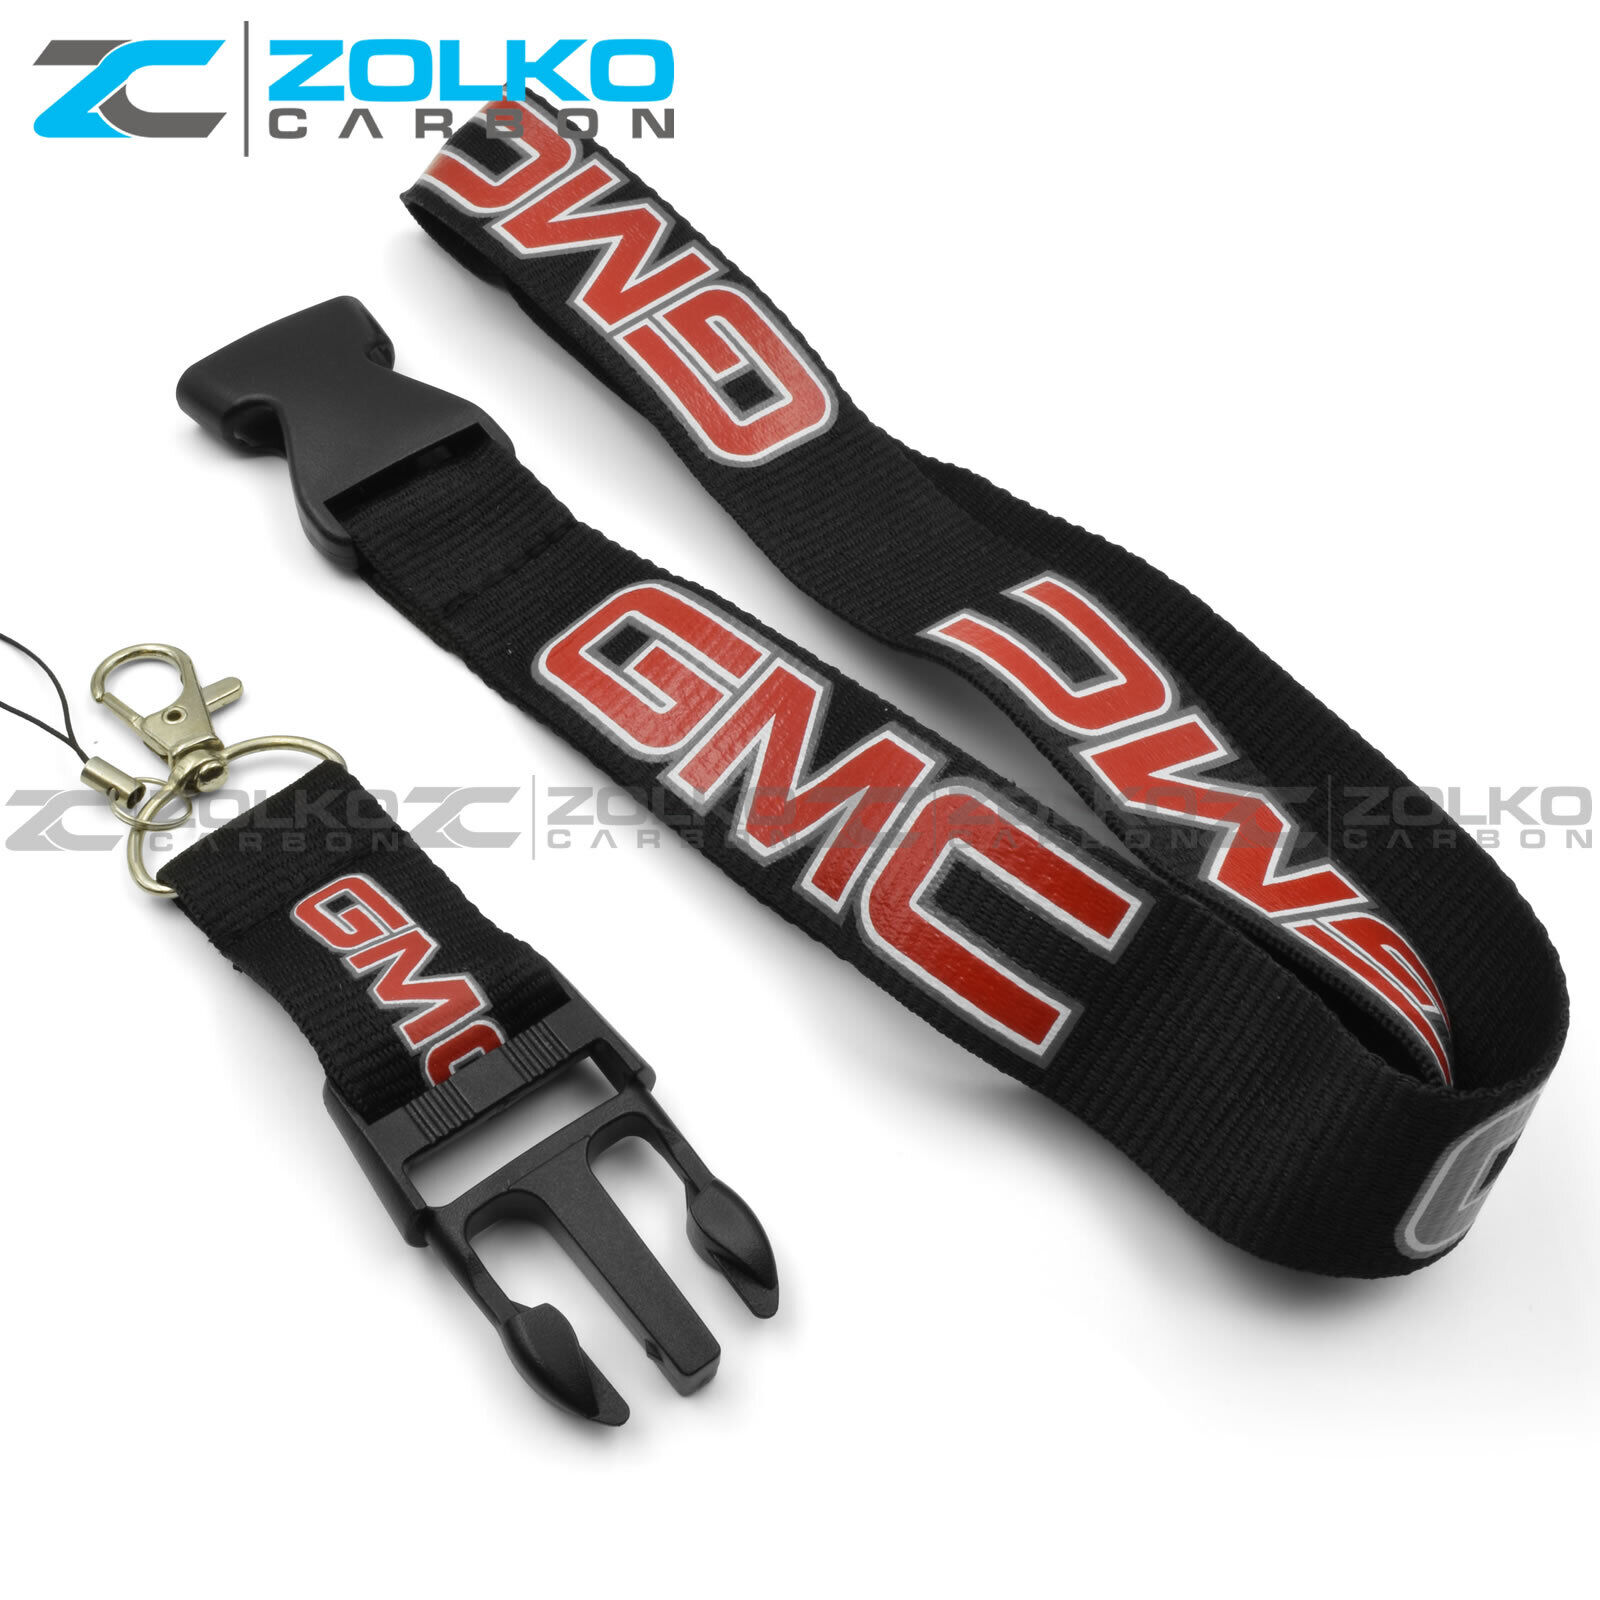 KEYCHAIN FOR GMC LANYARD QUICK RELEASE KEY CHAIN VALVE CAP OPTION - LY10